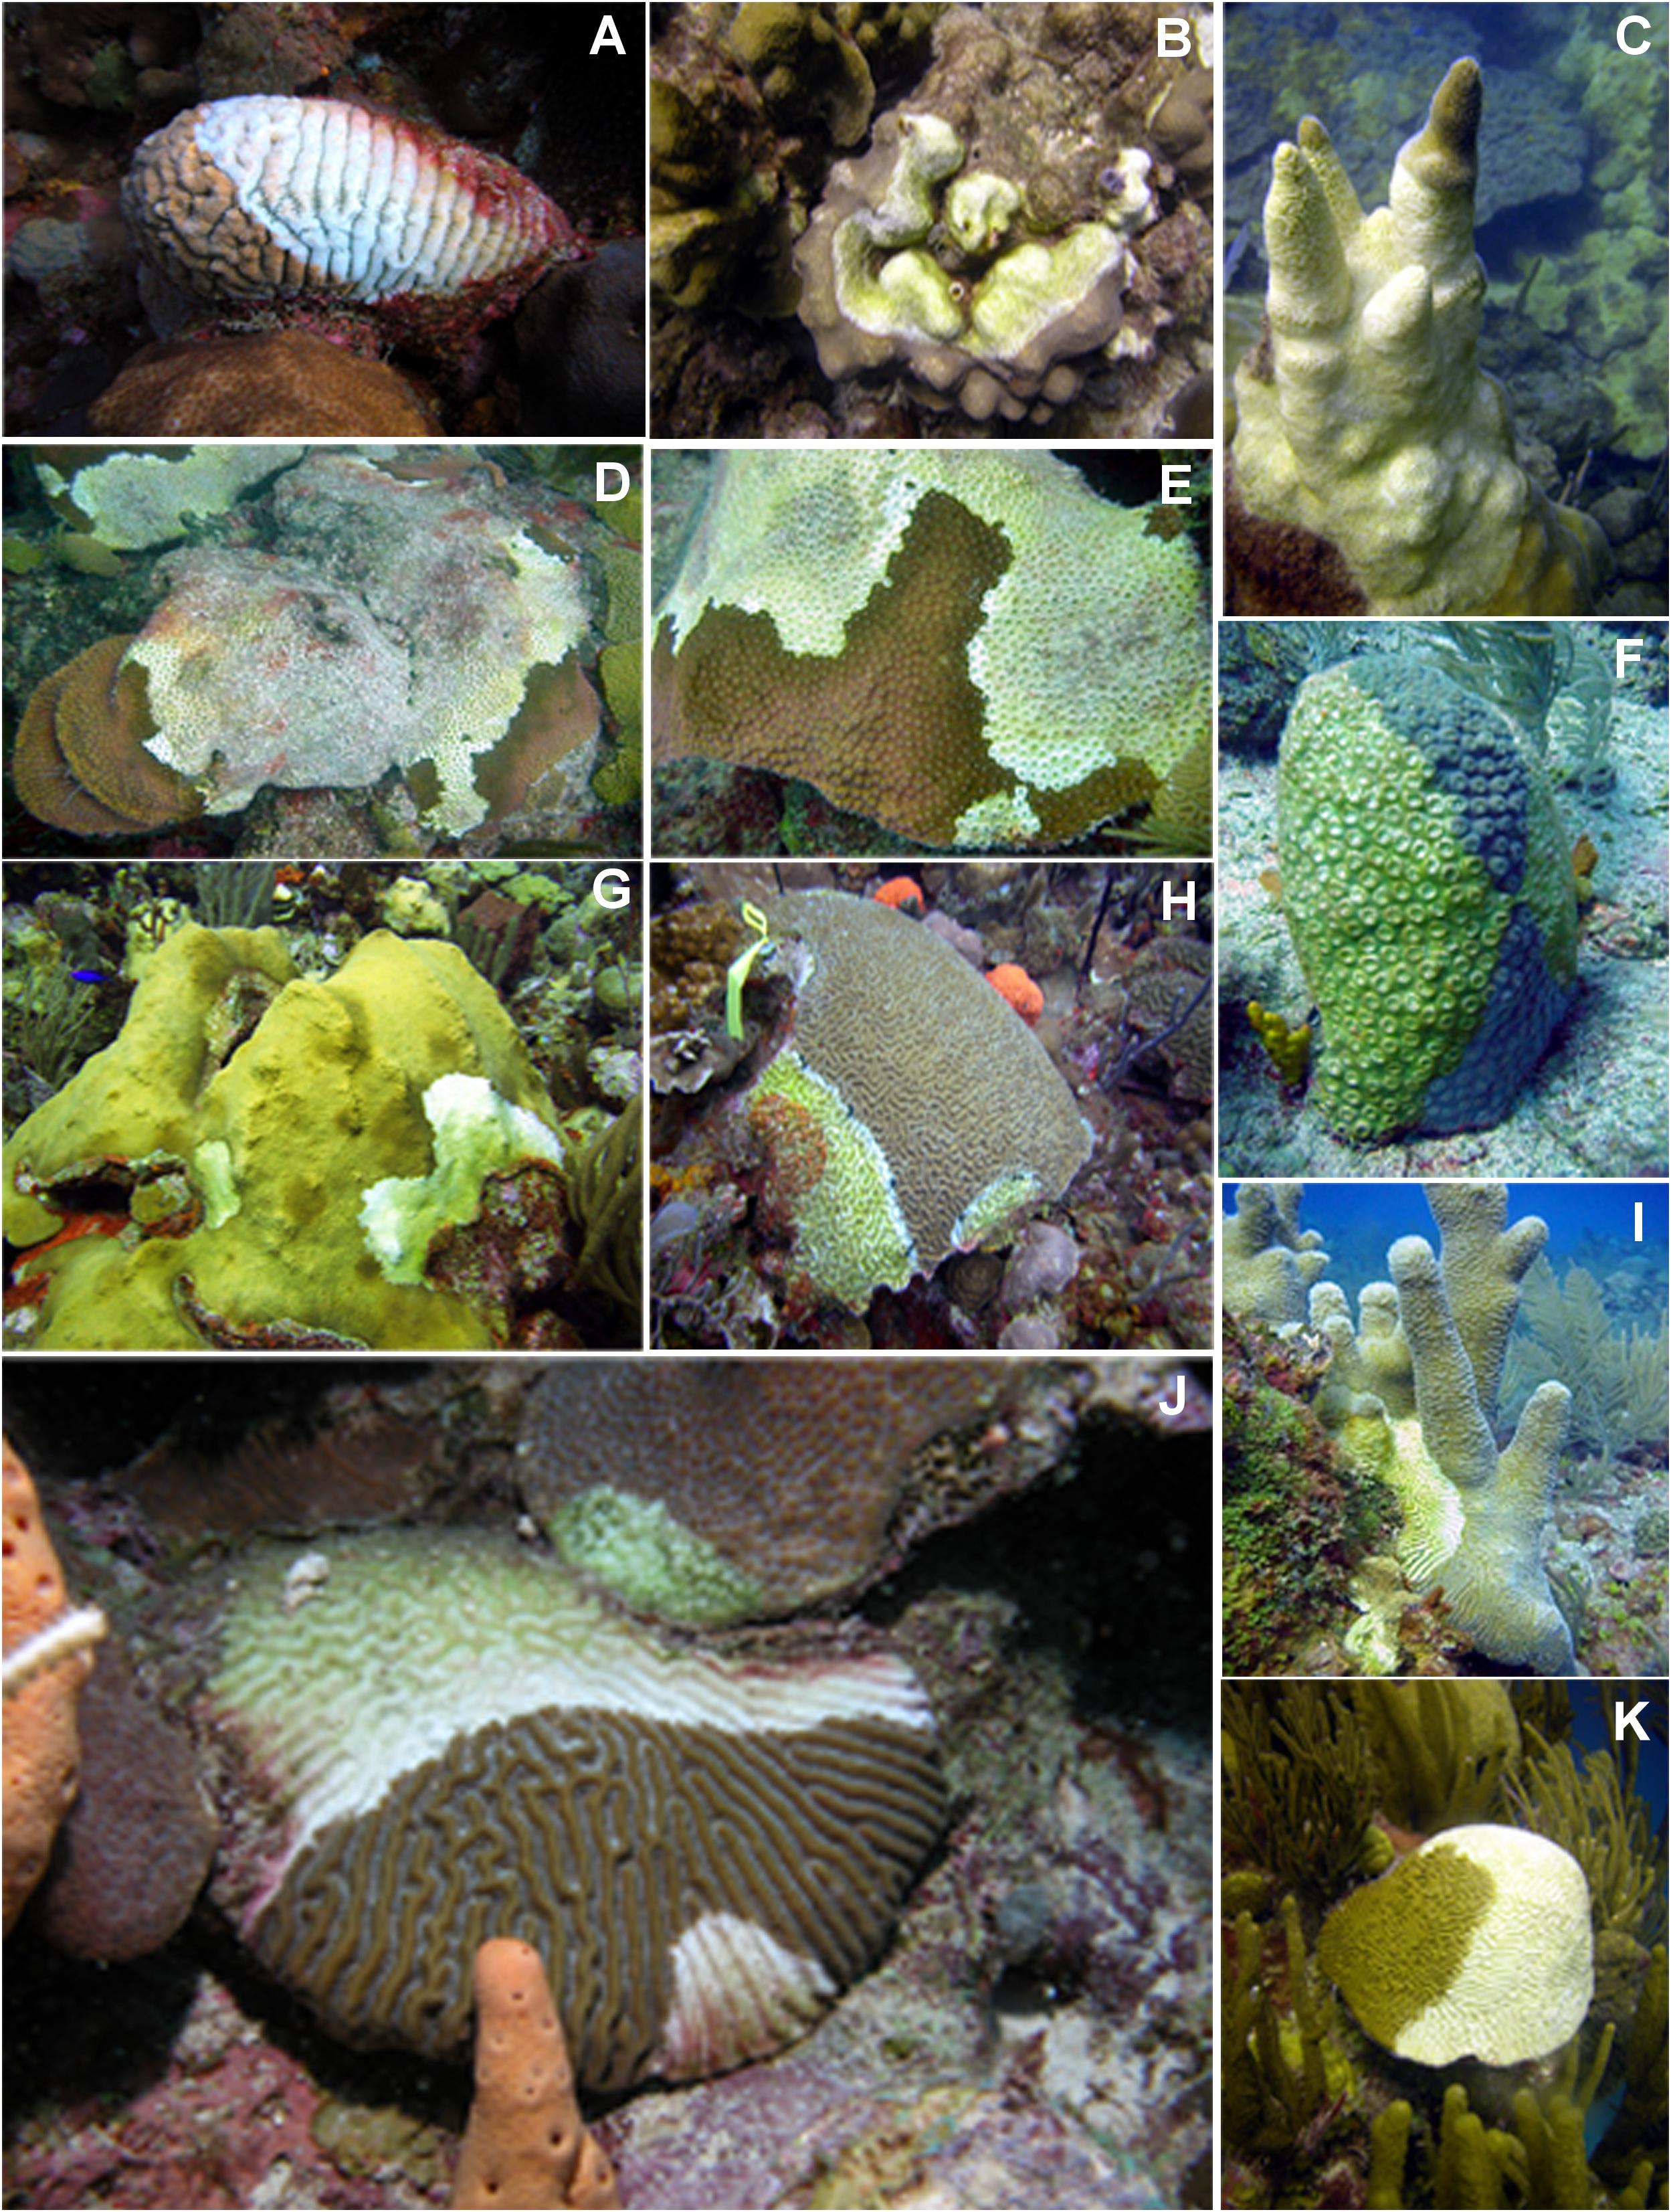 Immunity on the reef: Staghorn coral, its symbionts, and white